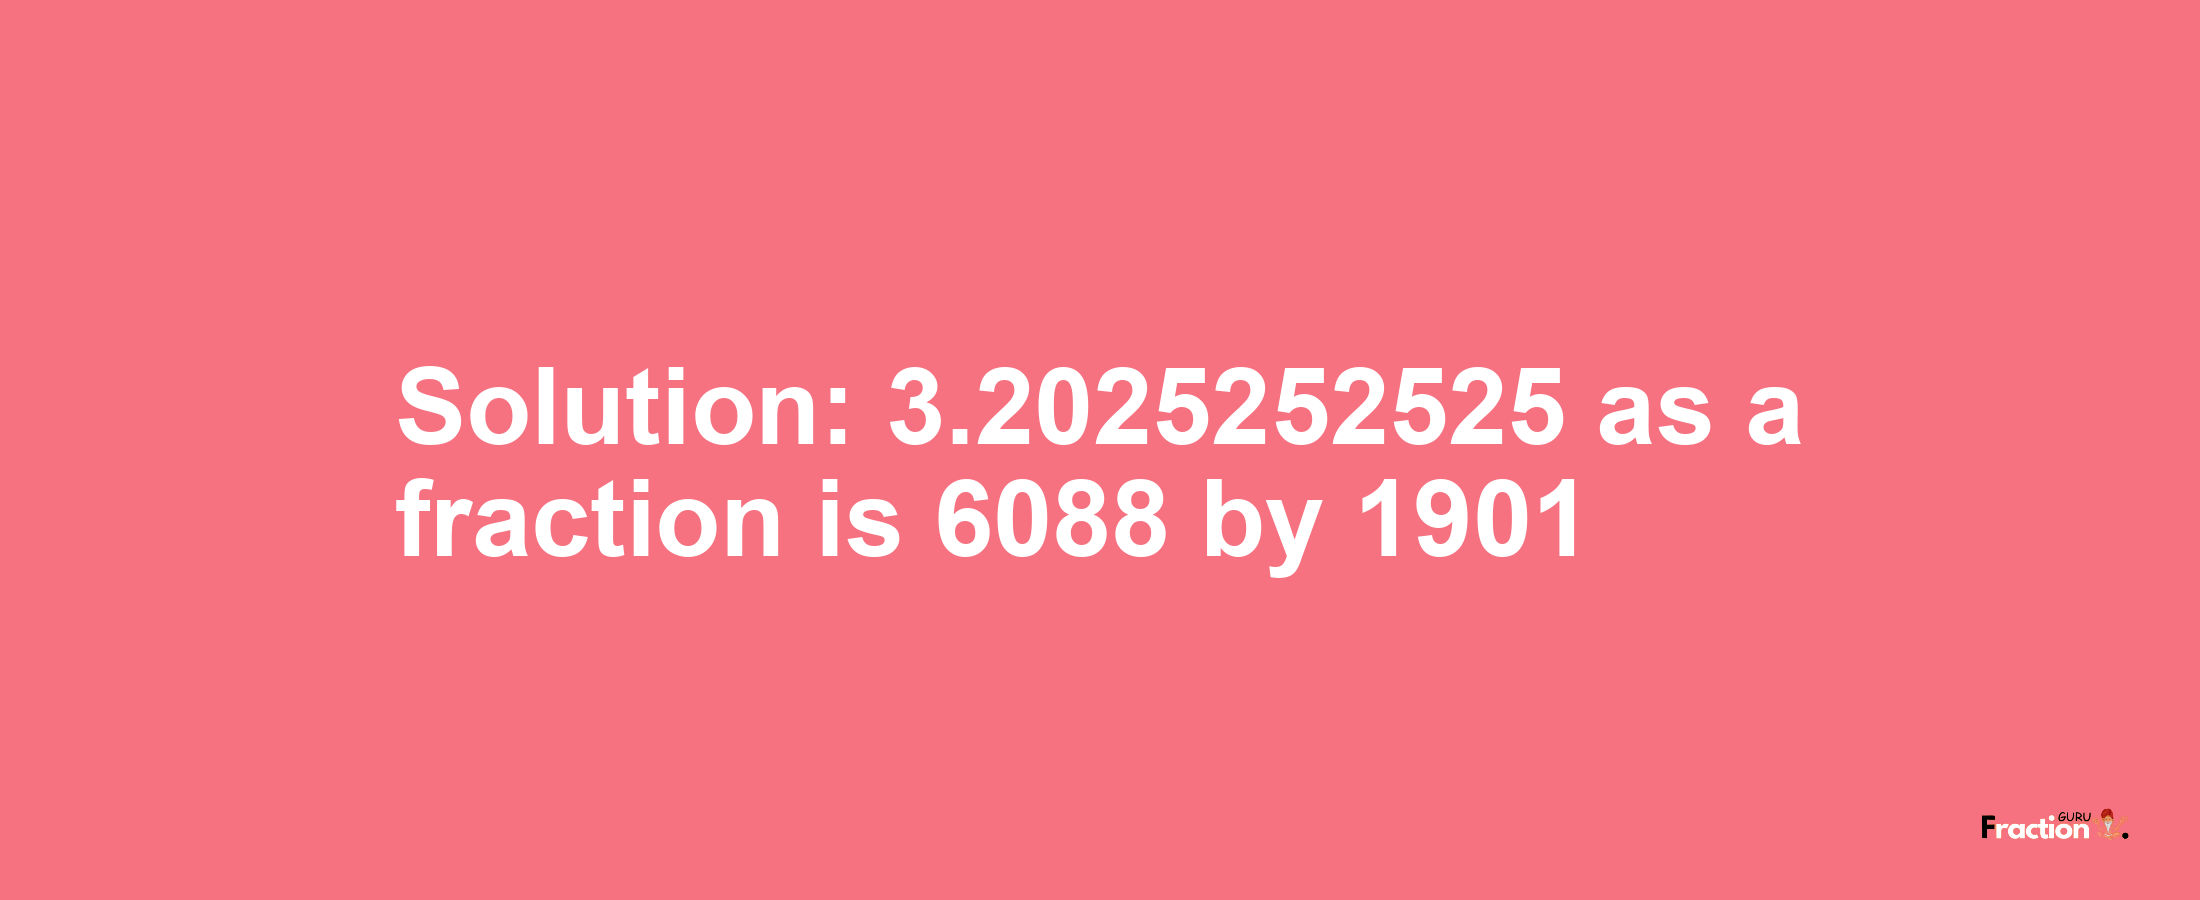 Solution:3.2025252525 as a fraction is 6088/1901